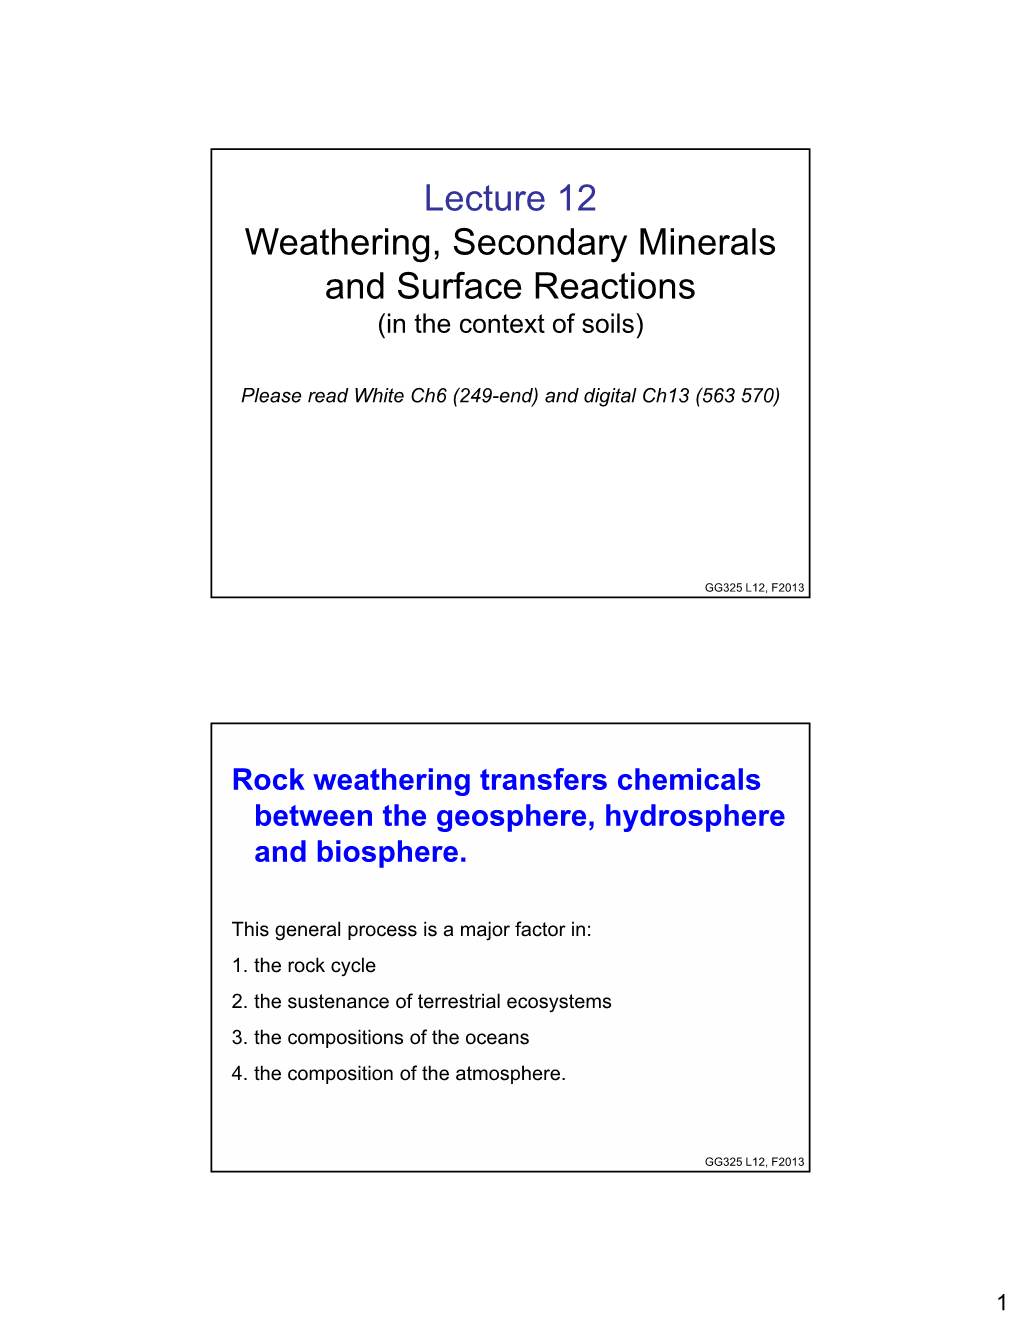 Lecture 12 Weathering, Secondary Minerals and Surface Reactions (In the Context of Soils)